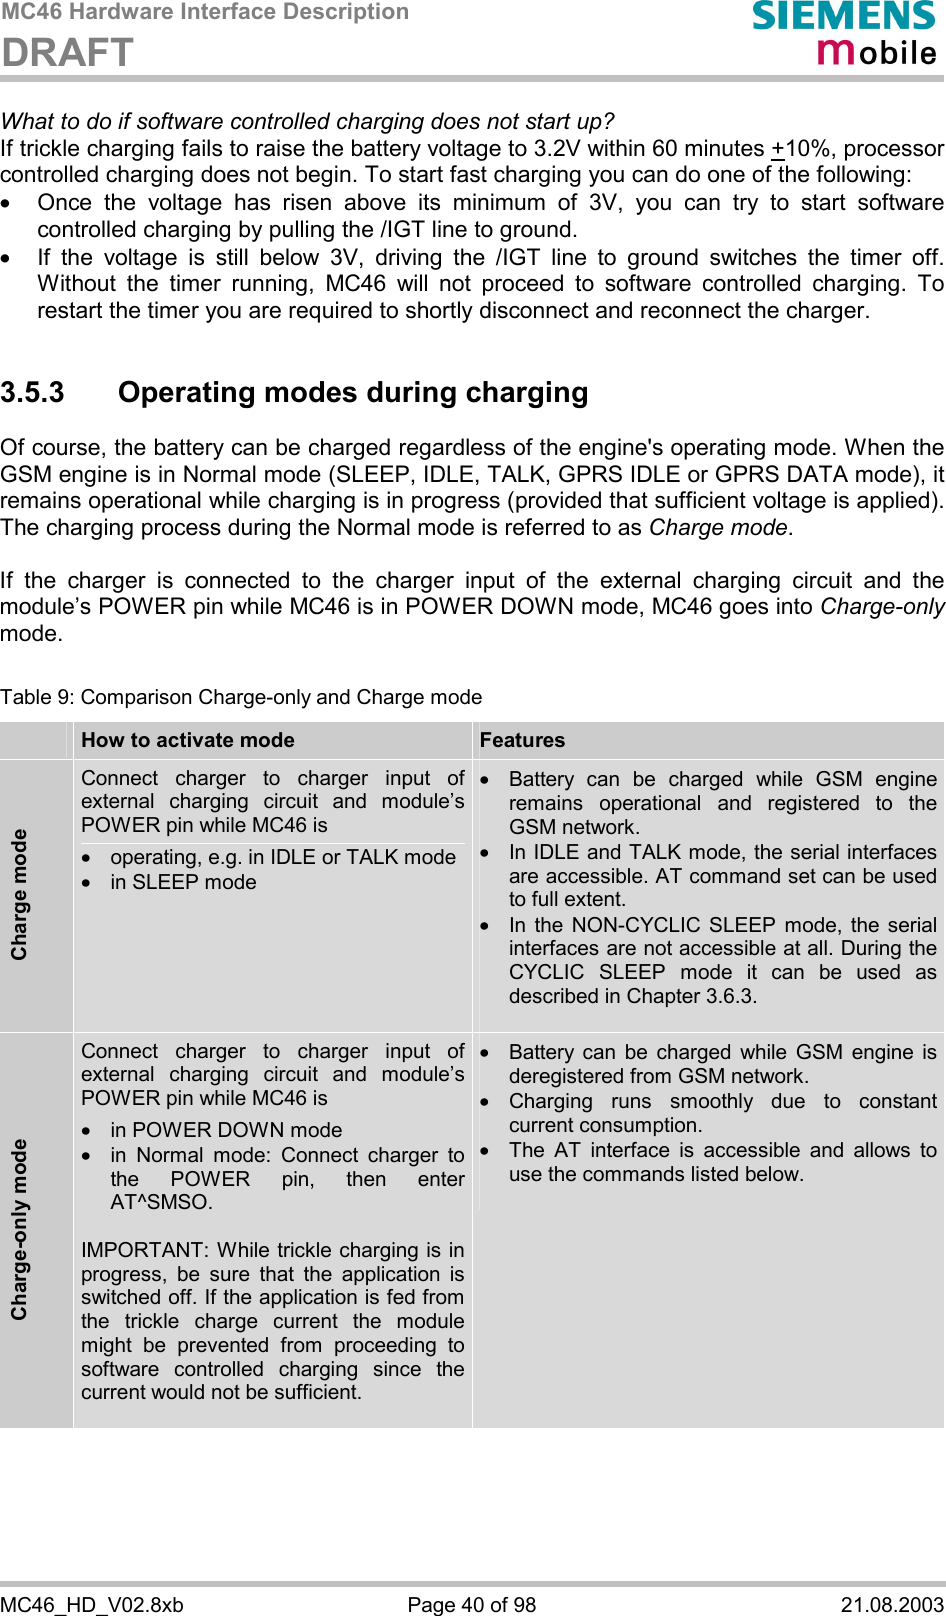 MC46 Hardware Interface Description DRAFT      MC46_HD_V02.8xb  Page 40 of 98  21.08.2003 What to do if software controlled charging does not start up? If trickle charging fails to raise the battery voltage to 3.2V within 60 minutes +10%, processor controlled charging does not begin. To start fast charging you can do one of the following:  ·  Once the voltage has risen above its minimum of 3V, you can try to start software controlled charging by pulling the /IGT line to ground.  ·  If the voltage is still below 3V, driving the /IGT line to ground switches the timer off. Without the timer running, MC46 will not proceed to software controlled charging. To restart the timer you are required to shortly disconnect and reconnect the charger.  3.5.3 Operating modes during charging Of course, the battery can be charged regardless of the engine&apos;s operating mode. When the GSM engine is in Normal mode (SLEEP, IDLE, TALK, GPRS IDLE or GPRS DATA mode), it remains operational while charging is in progress (provided that sufficient voltage is applied). The charging process during the Normal mode is referred to as Charge mode.   If the charger is connected to the charger input of the external charging circuit and the module’s POWER pin while MC46 is in POWER DOWN mode, MC46 goes into Charge-only mode.   Table 9: Comparison Charge-only and Charge mode  How to activate mode  Features Charge mode Connect charger to charger input of external charging circuit and module’s POWER pin while MC46 is ·  operating, e.g. in IDLE or TALK mode ·  in SLEEP mode ·  Battery can be charged while GSM engine remains operational and registered to the GSM network. ·  In IDLE and TALK mode, the serial interfaces are accessible. AT command set can be used to full extent. ·  In the NON-CYCLIC SLEEP mode, the serial interfaces are not accessible at all. During the CYCLIC SLEEP mode it can be used as described in Chapter 3.6.3.  Charge-only mode Connect charger to charger input of external charging circuit and module’s POWER pin while MC46 is ·  in POWER DOWN mode ·  in Normal mode: Connect charger to the POWER pin, then enter AT^SMSO.  IMPORTANT: While trickle charging is in progress, be sure that the application is switched off. If the application is fed from the trickle charge current the module might be prevented from proceeding to software controlled charging since the current would not be sufficient.   ·  Battery can be charged while GSM engine is deregistered from GSM network. ·  Charging runs smoothly due to constant current consumption. ·  The AT interface is accessible and allows to use the commands listed below.     